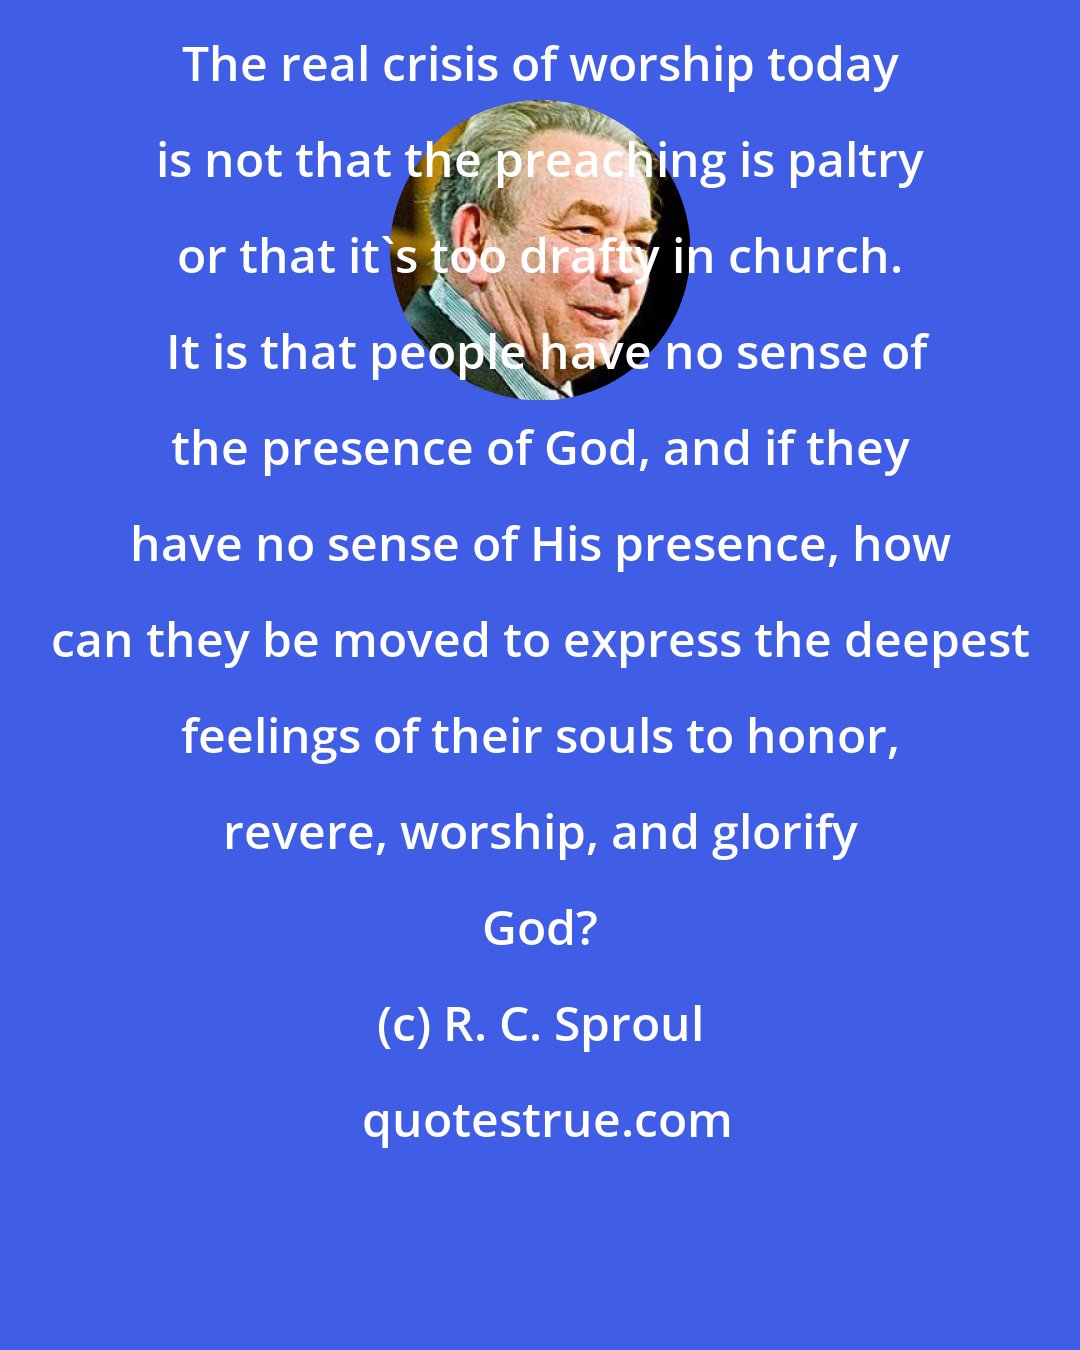 R. C. Sproul: The real crisis of worship today is not that the preaching is paltry or that it's too drafty in church.  It is that people have no sense of the presence of God, and if they have no sense of His presence, how can they be moved to express the deepest feelings of their souls to honor, revere, worship, and glorify God?